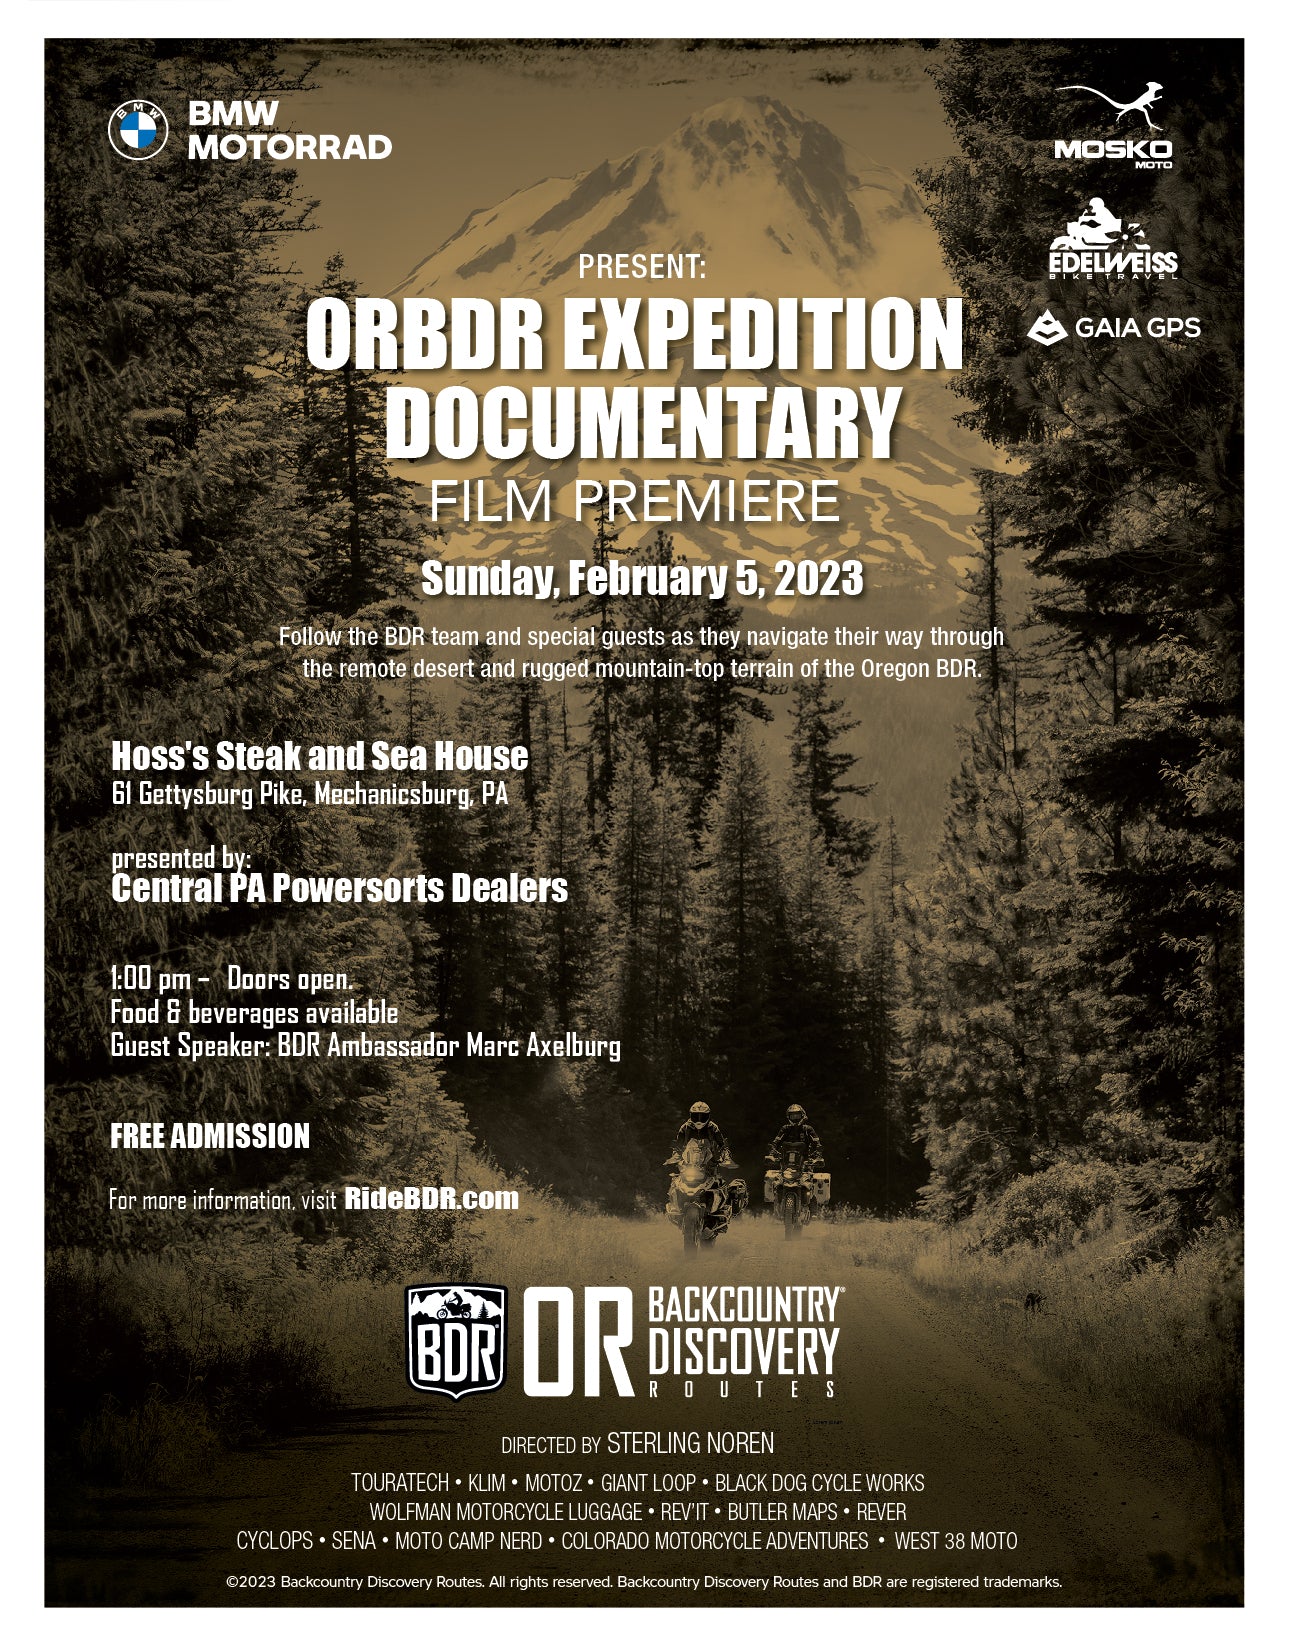 BDR CPPD Backcountry Discovery Route Documentary Free Event - 2/5/2023